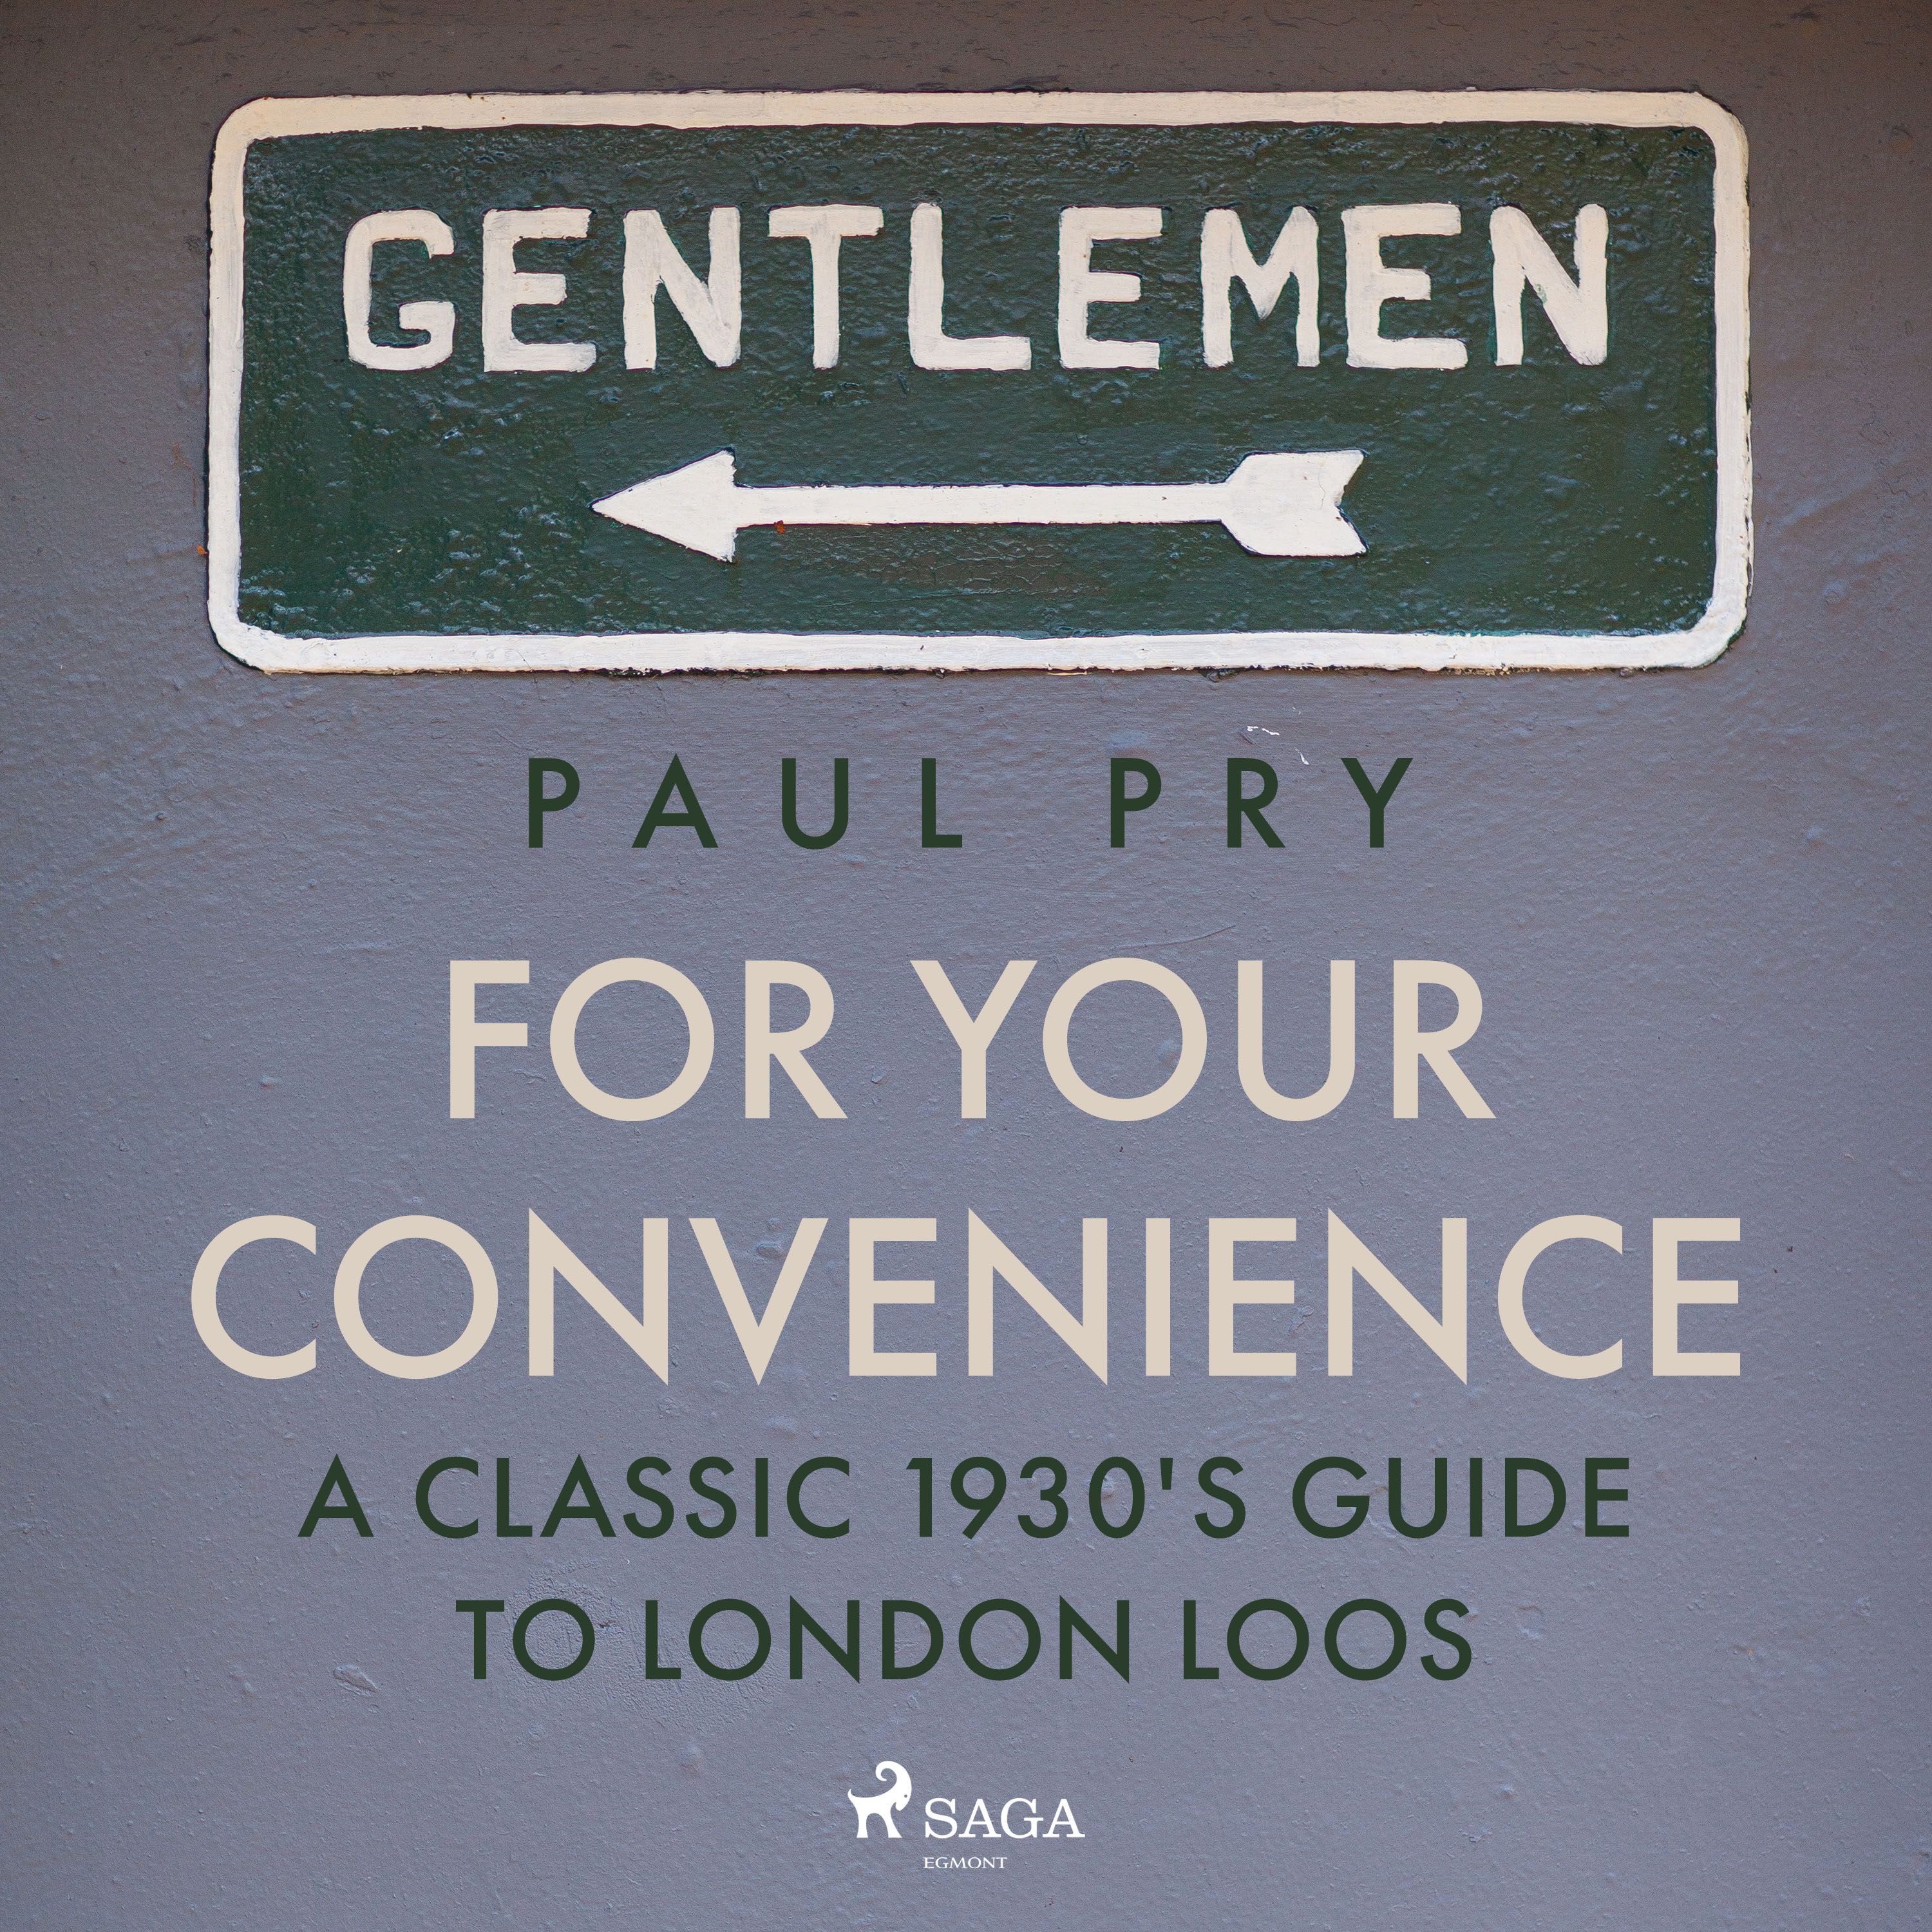 For Your Convenience - A CLASSIC 1930'S GUIDE TO LONDON LOOS, ljudbok av Paul Pry